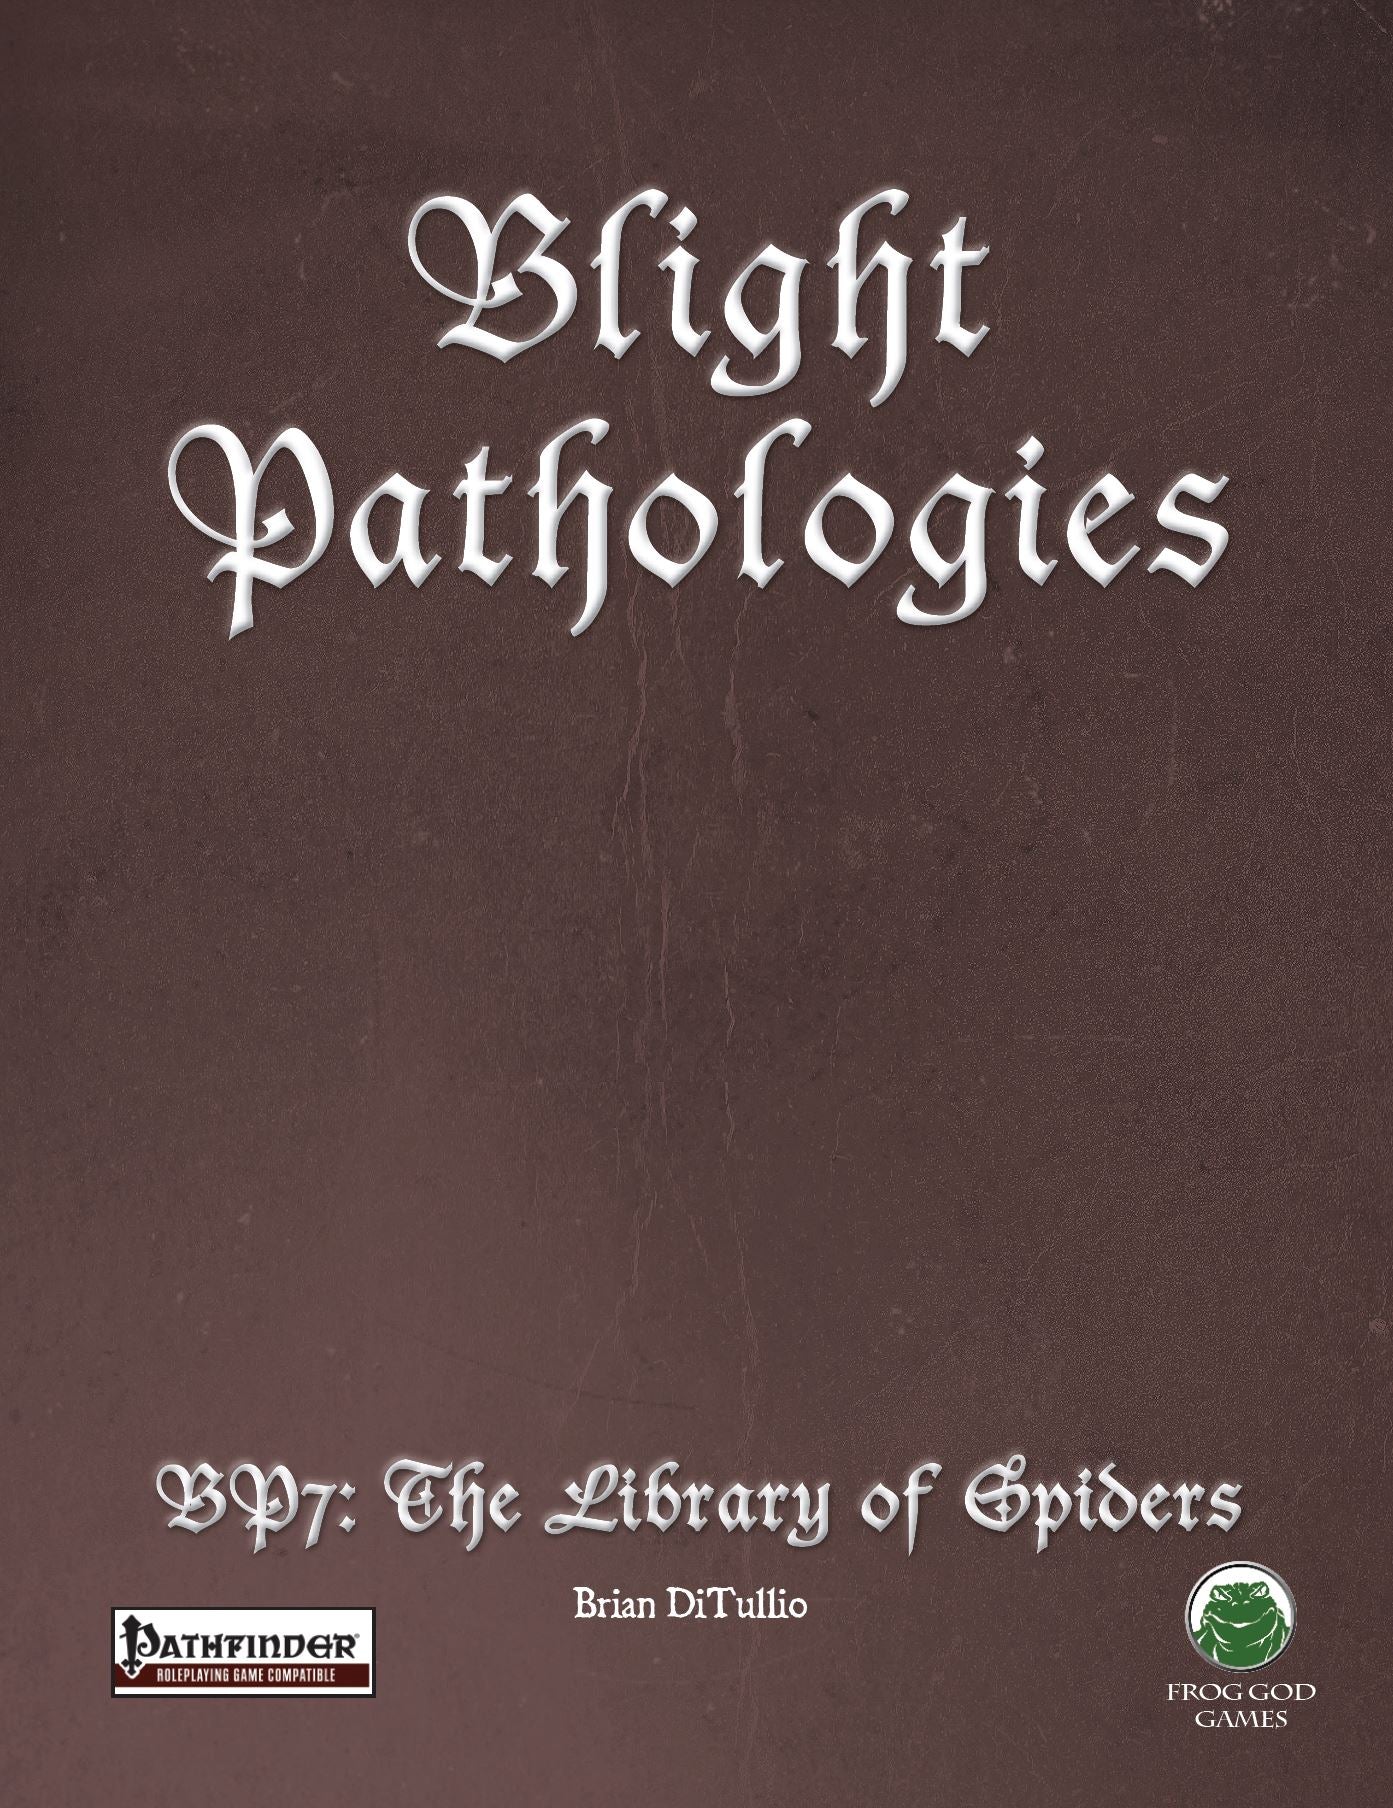 The Blight Pathologies 7: Library of Spiders